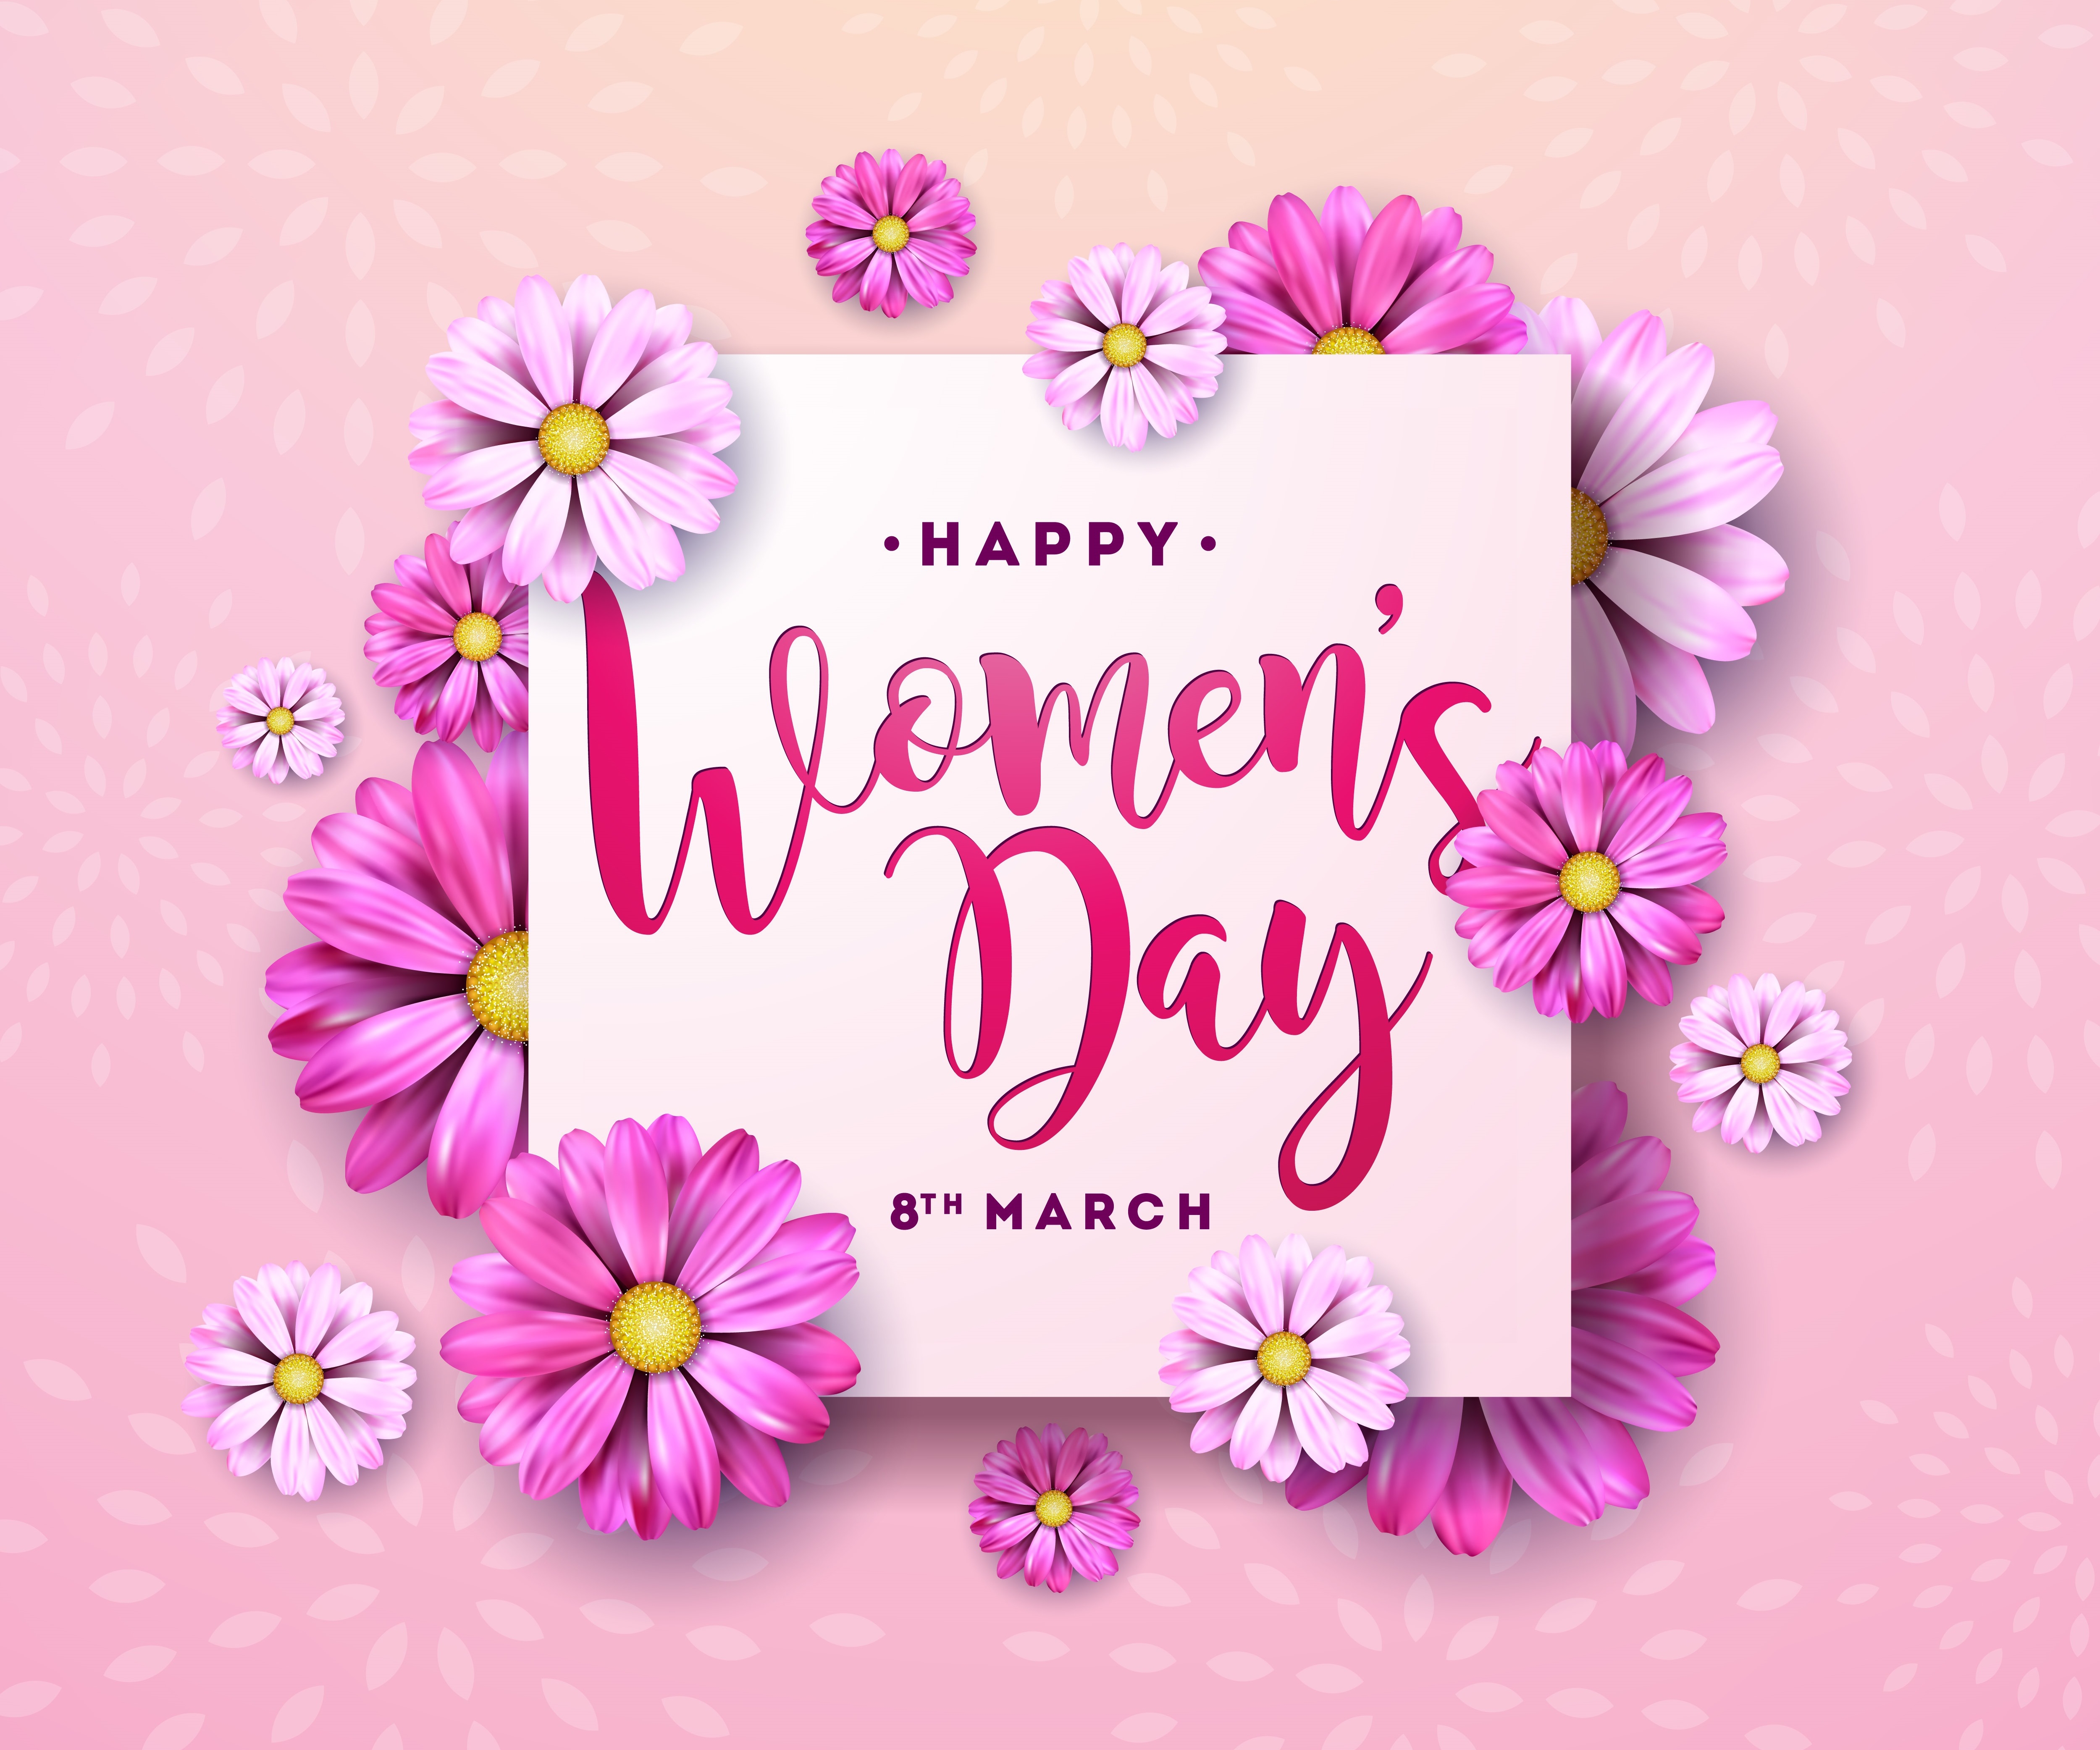 holiday, women's day, happy women's day, pink flower